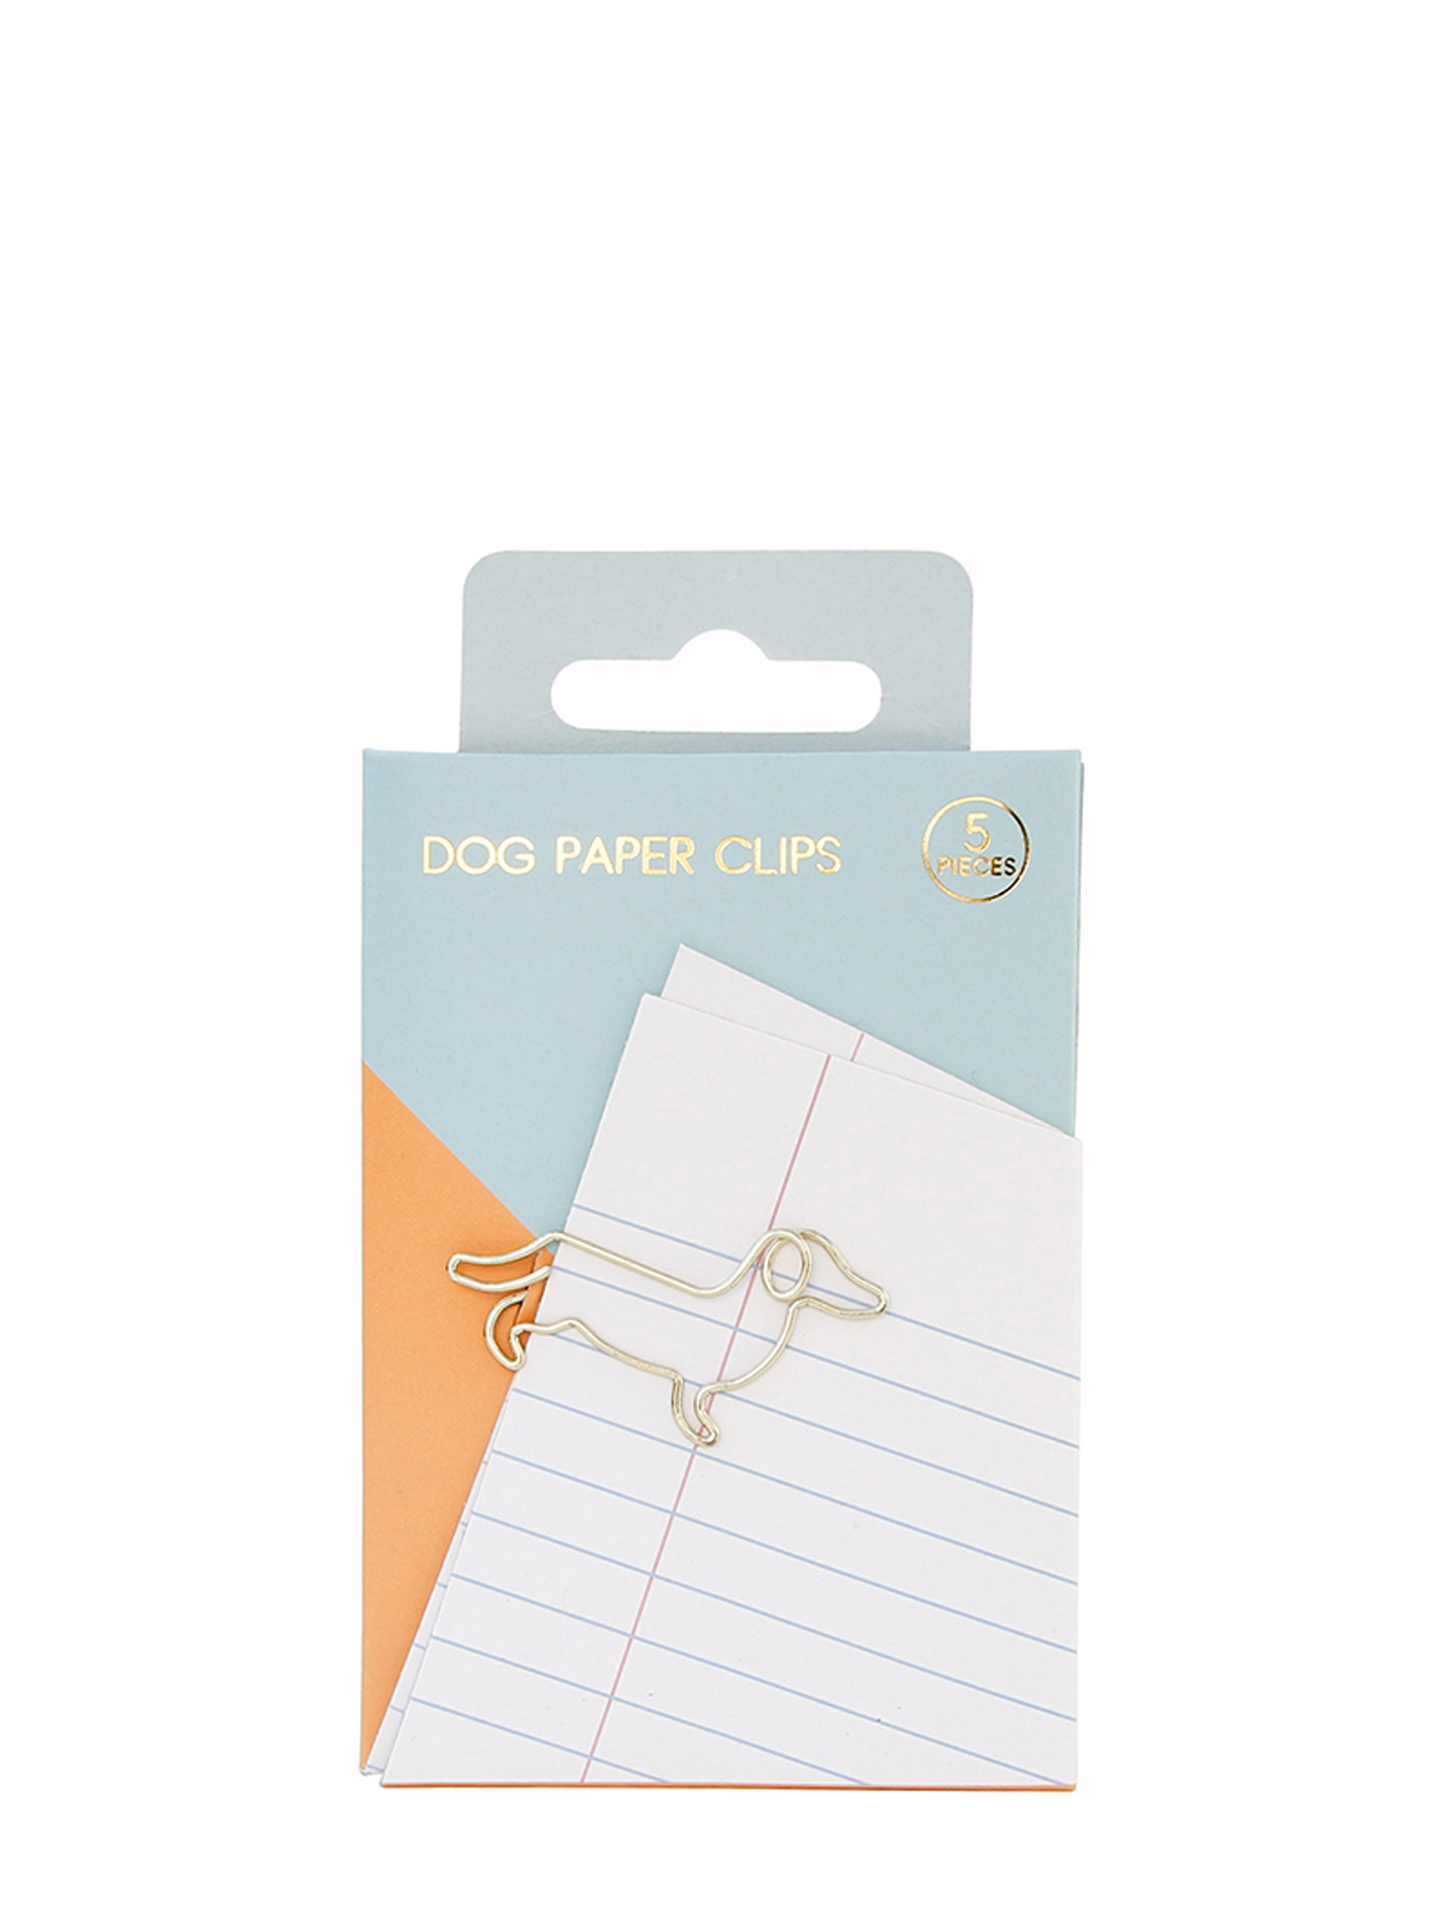 Dog Paper clips